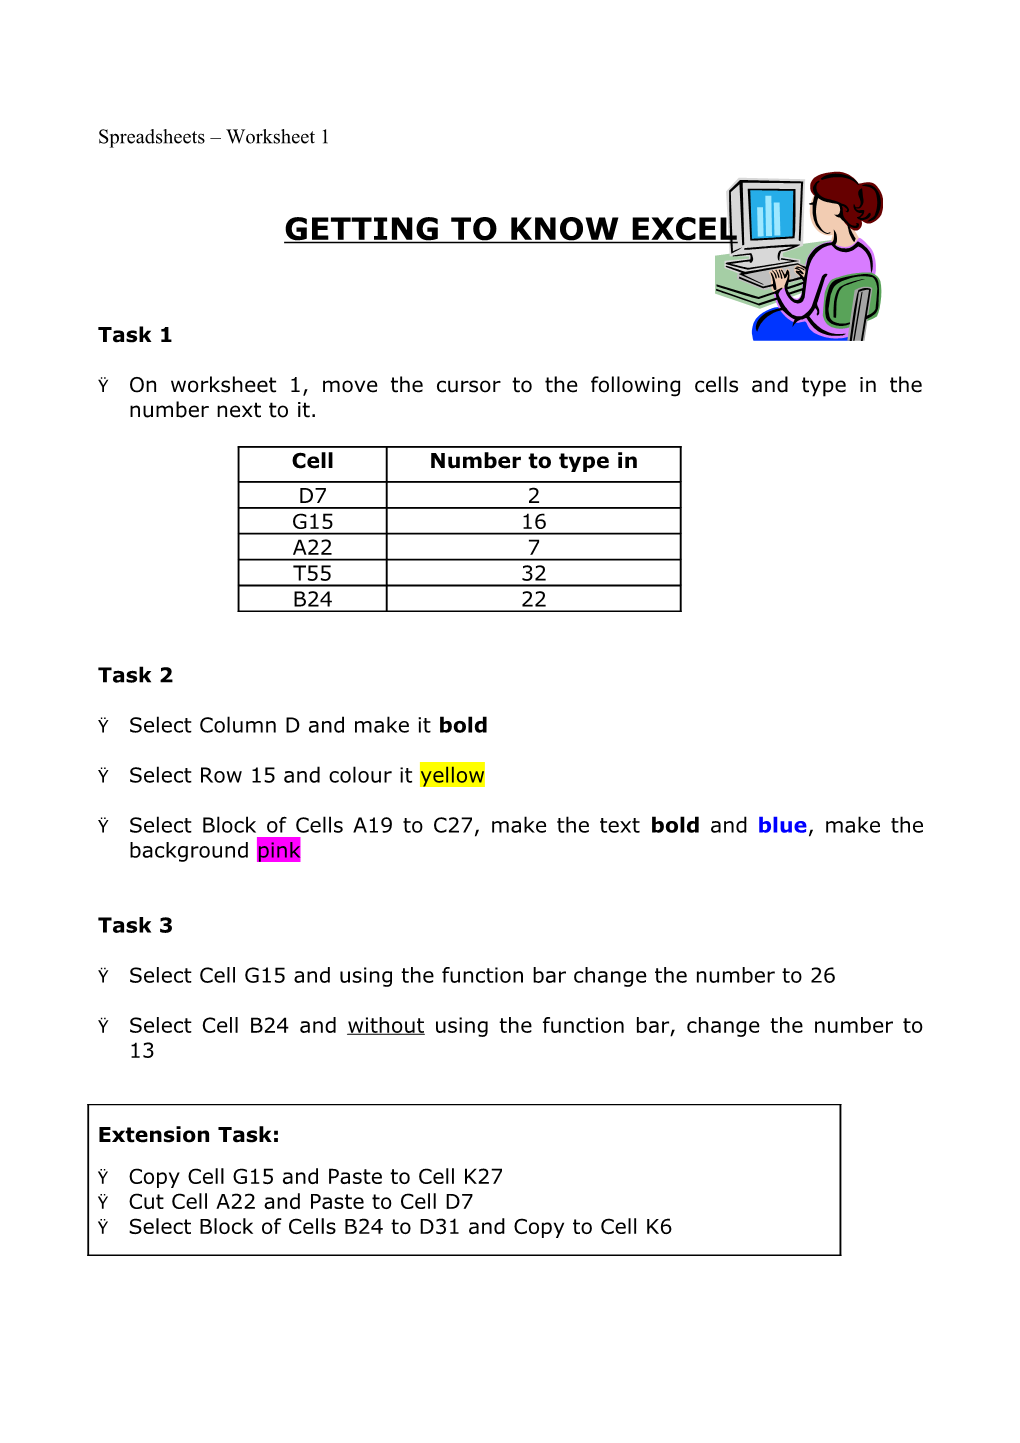 Getting to Know Excel